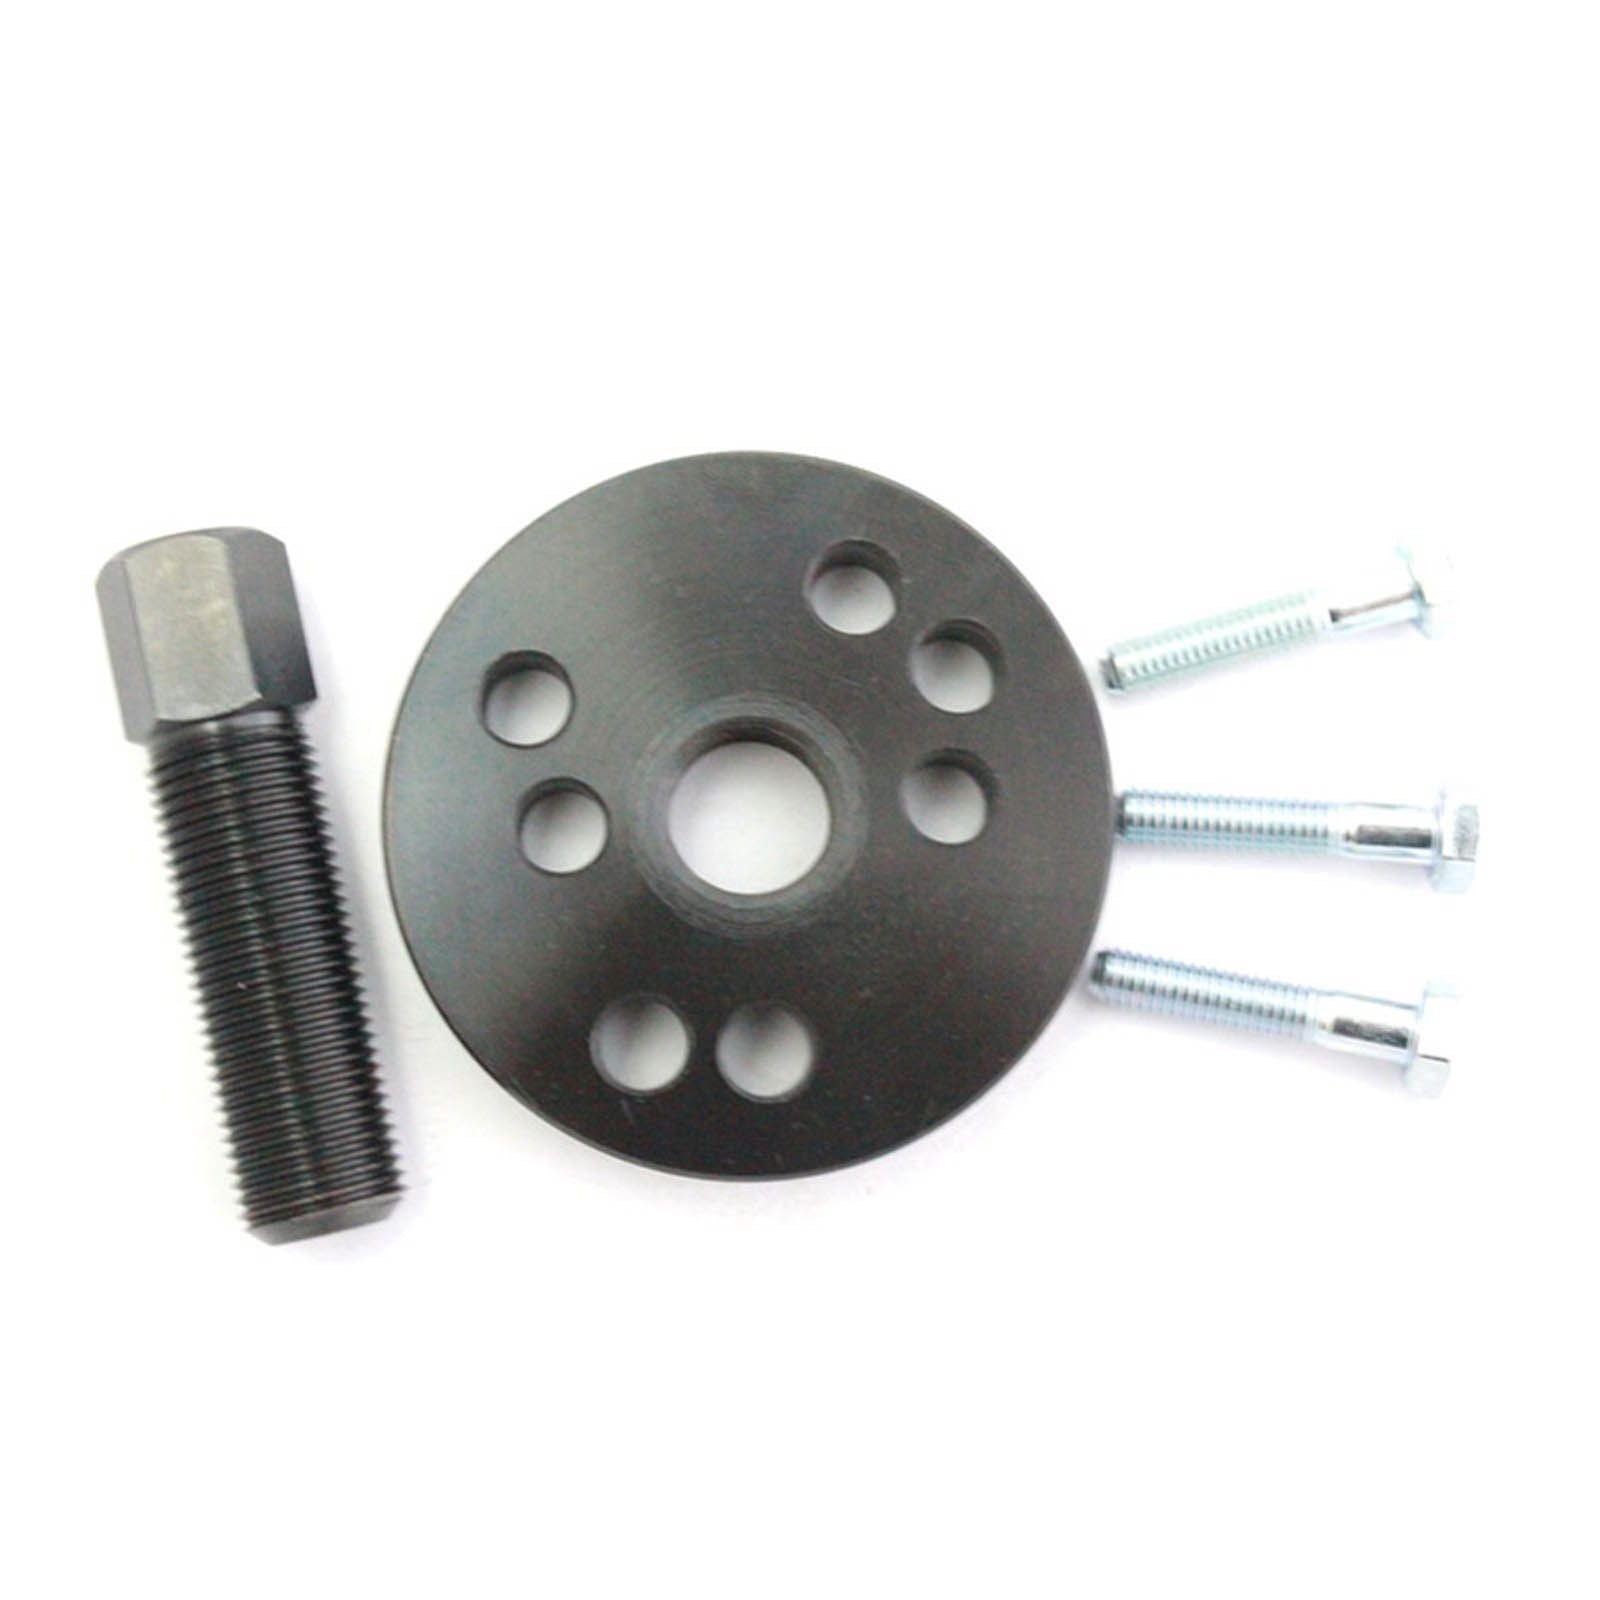 New WHITES Clutch / Primary Gears Removal Tool #TMD21509